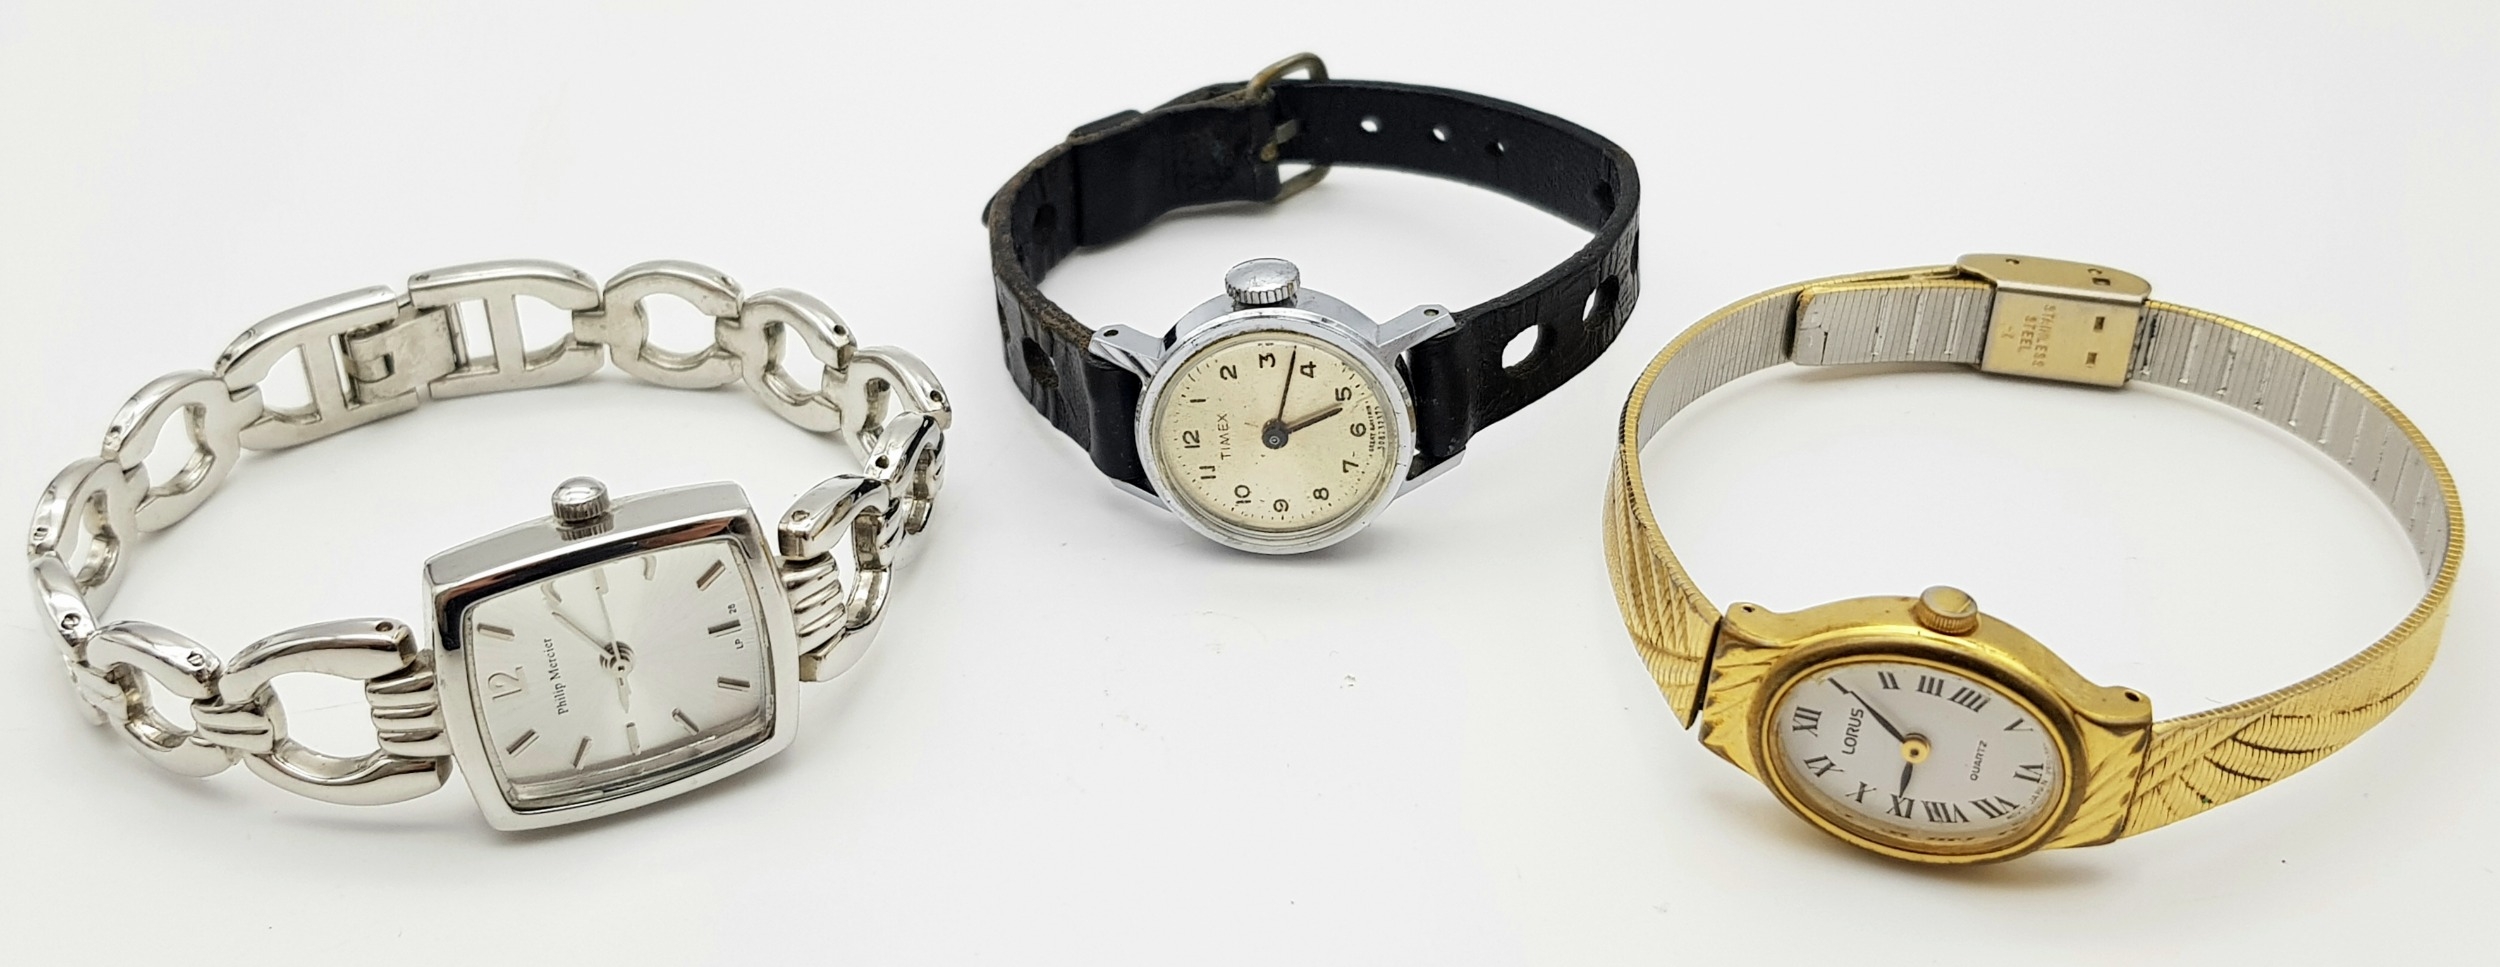 A Parcel of Three Ladies Dress Watches. Comprising: 1) A Chain Link Bracelet Quartz Watch by